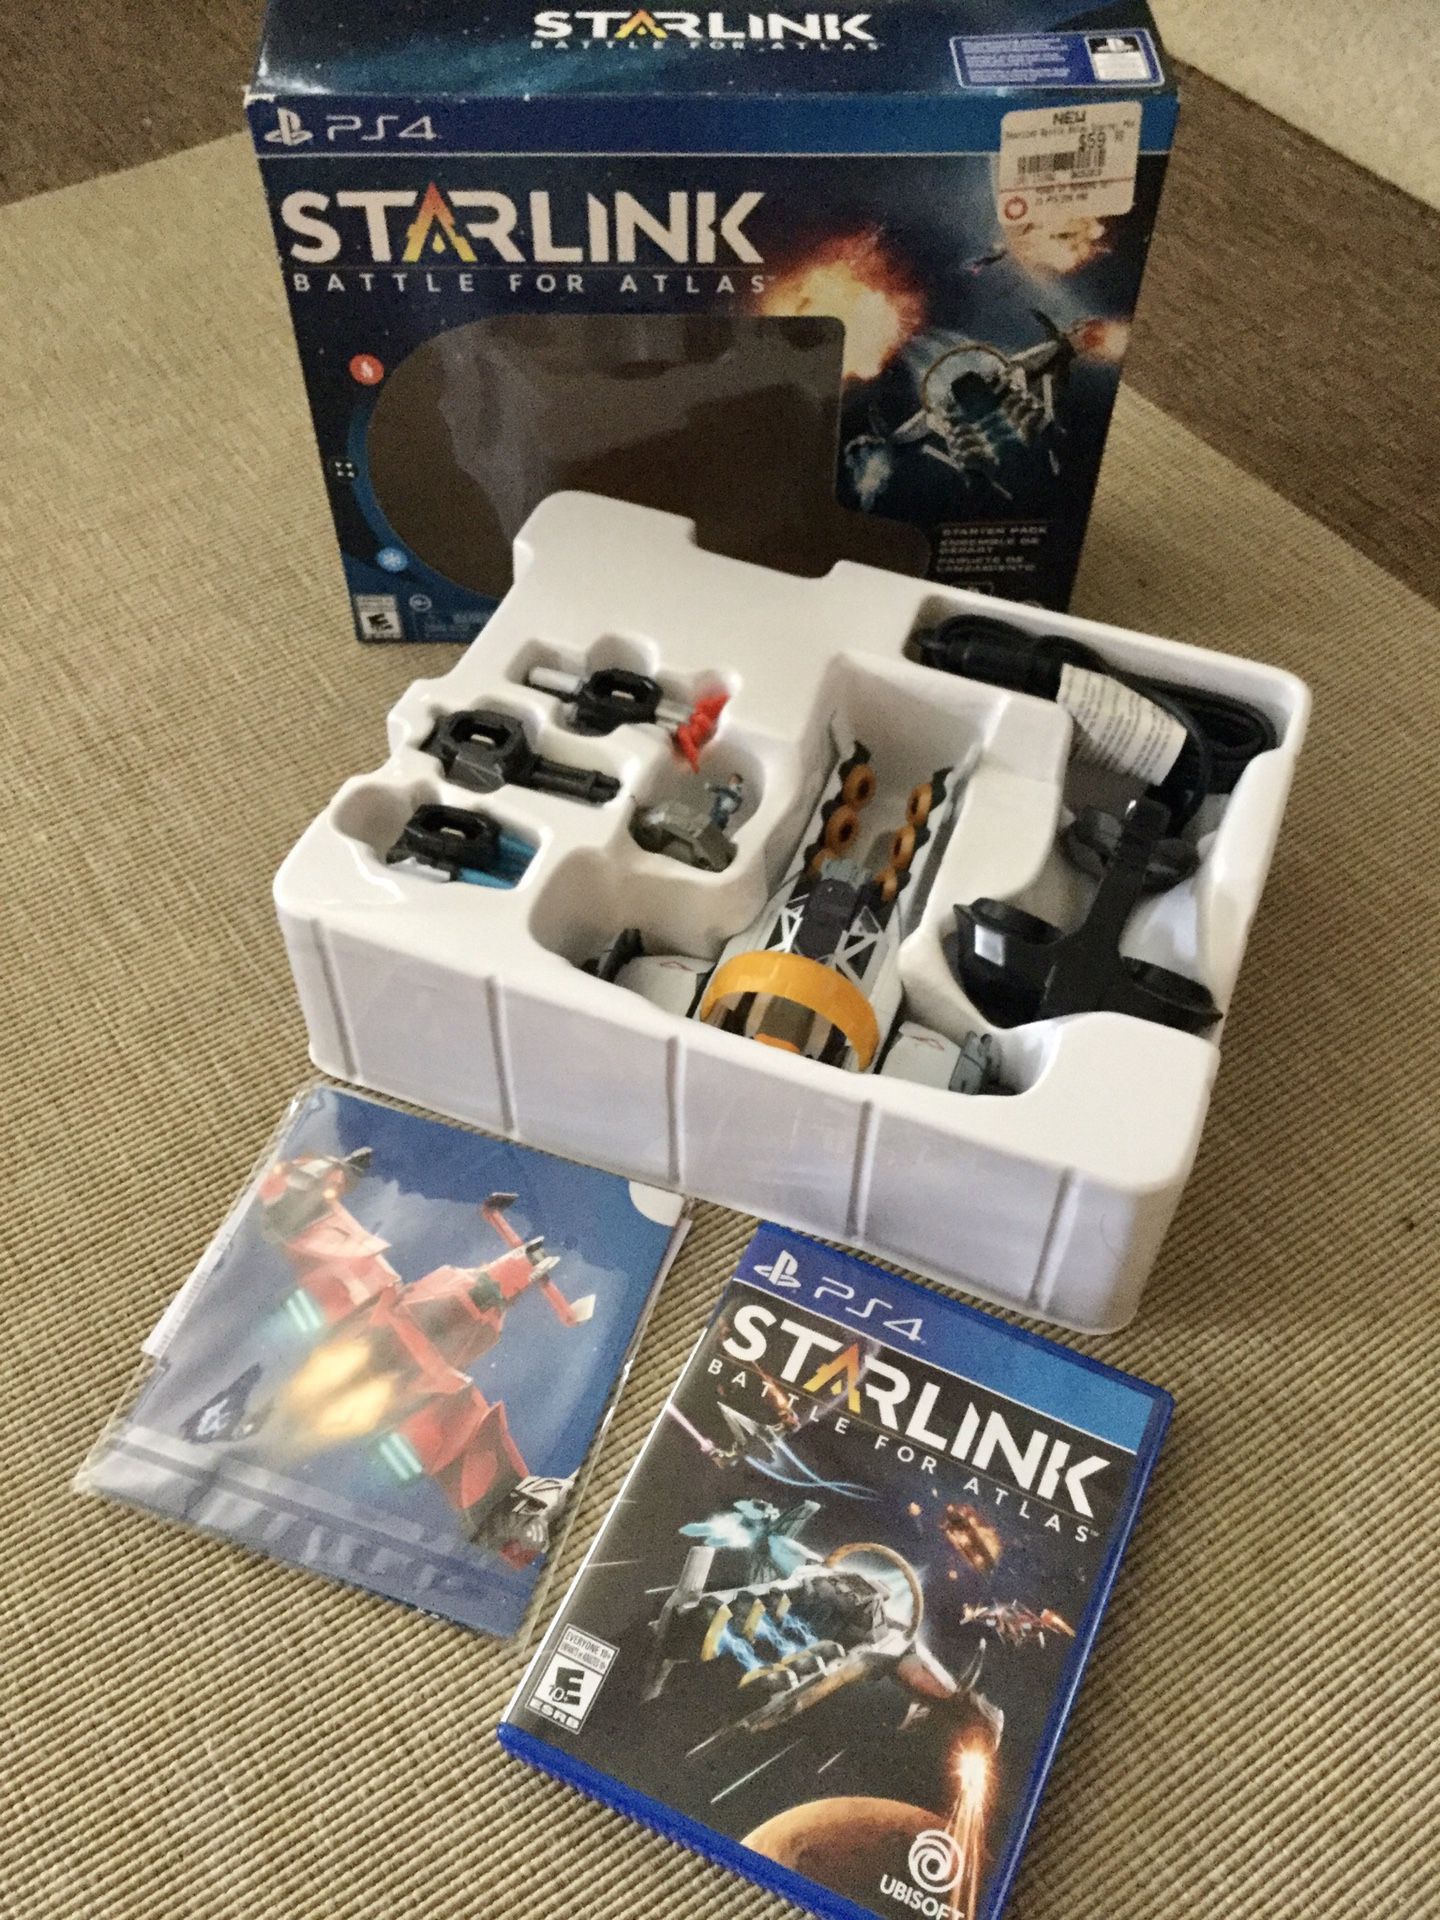 PS4 Video Game STARLINK * with accessories/ New original price $59.90 on SALE $45